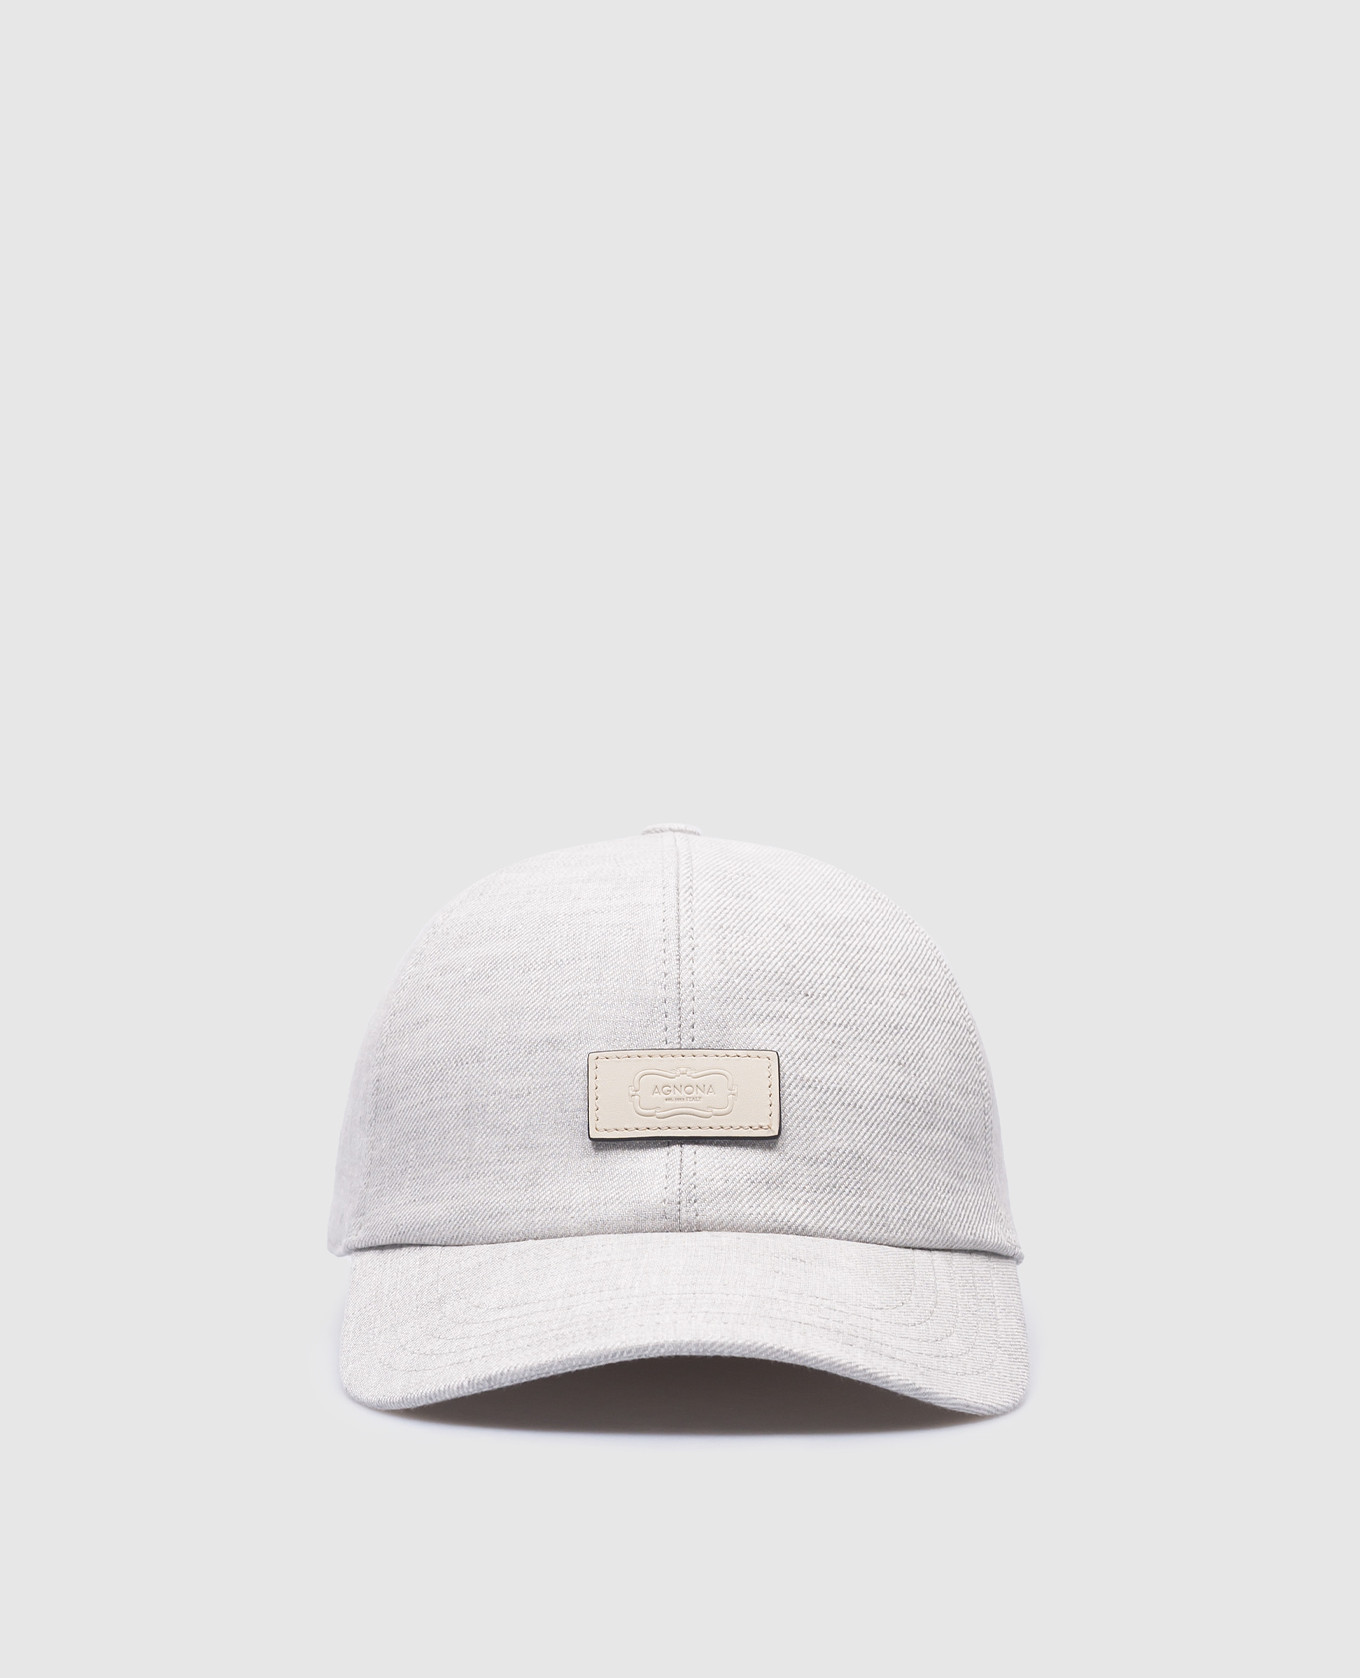 Gray linen cap with logo patch